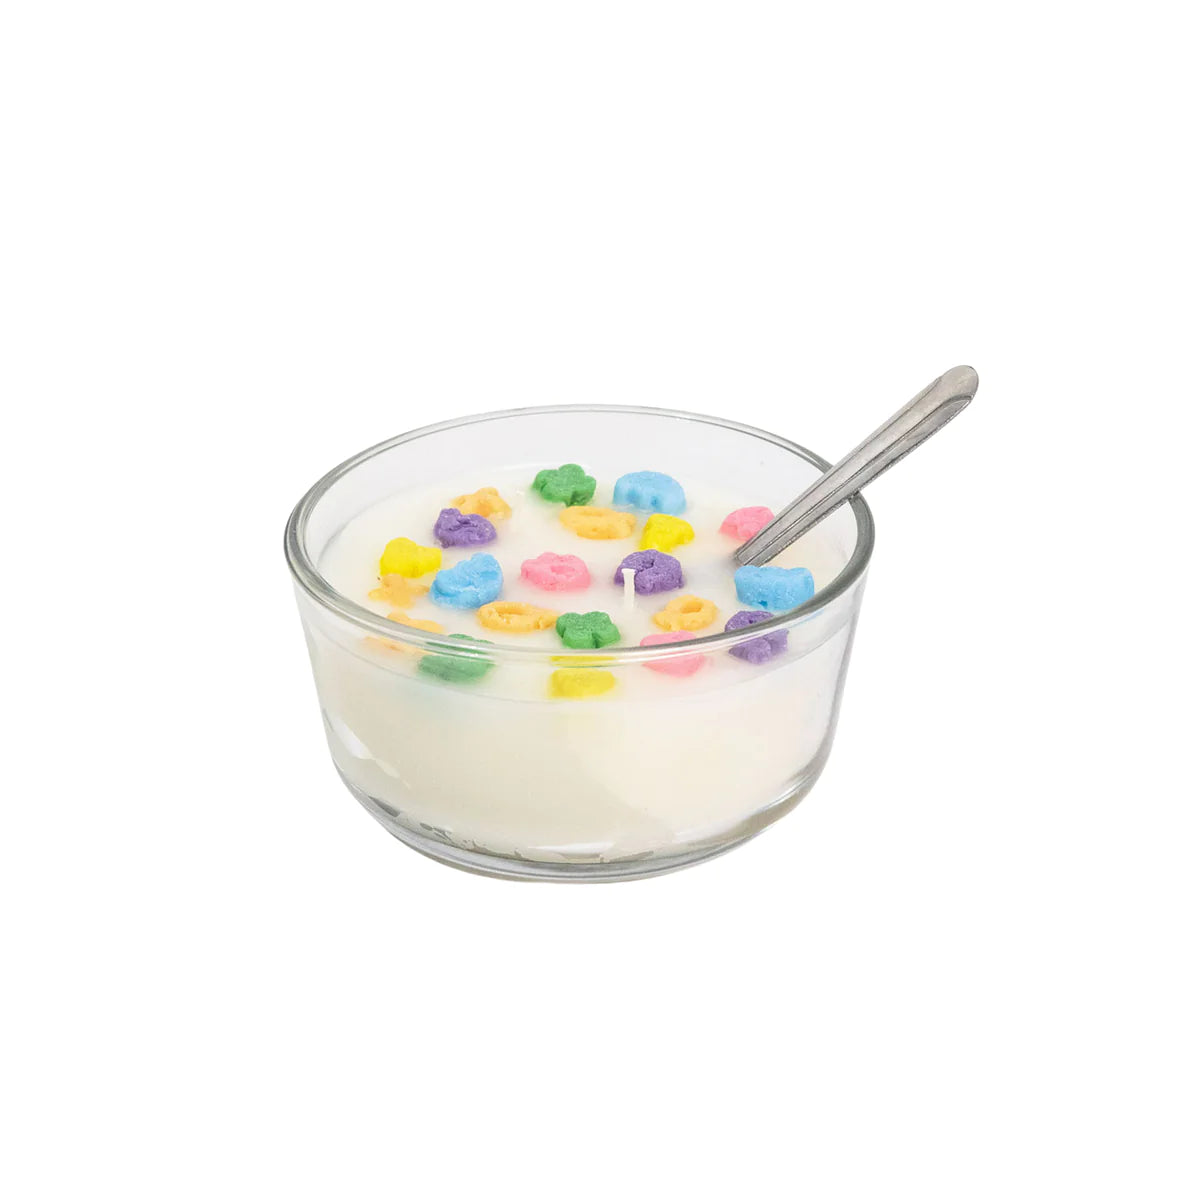 Ardent Candle - Shamrock Surprise Cereal Candle